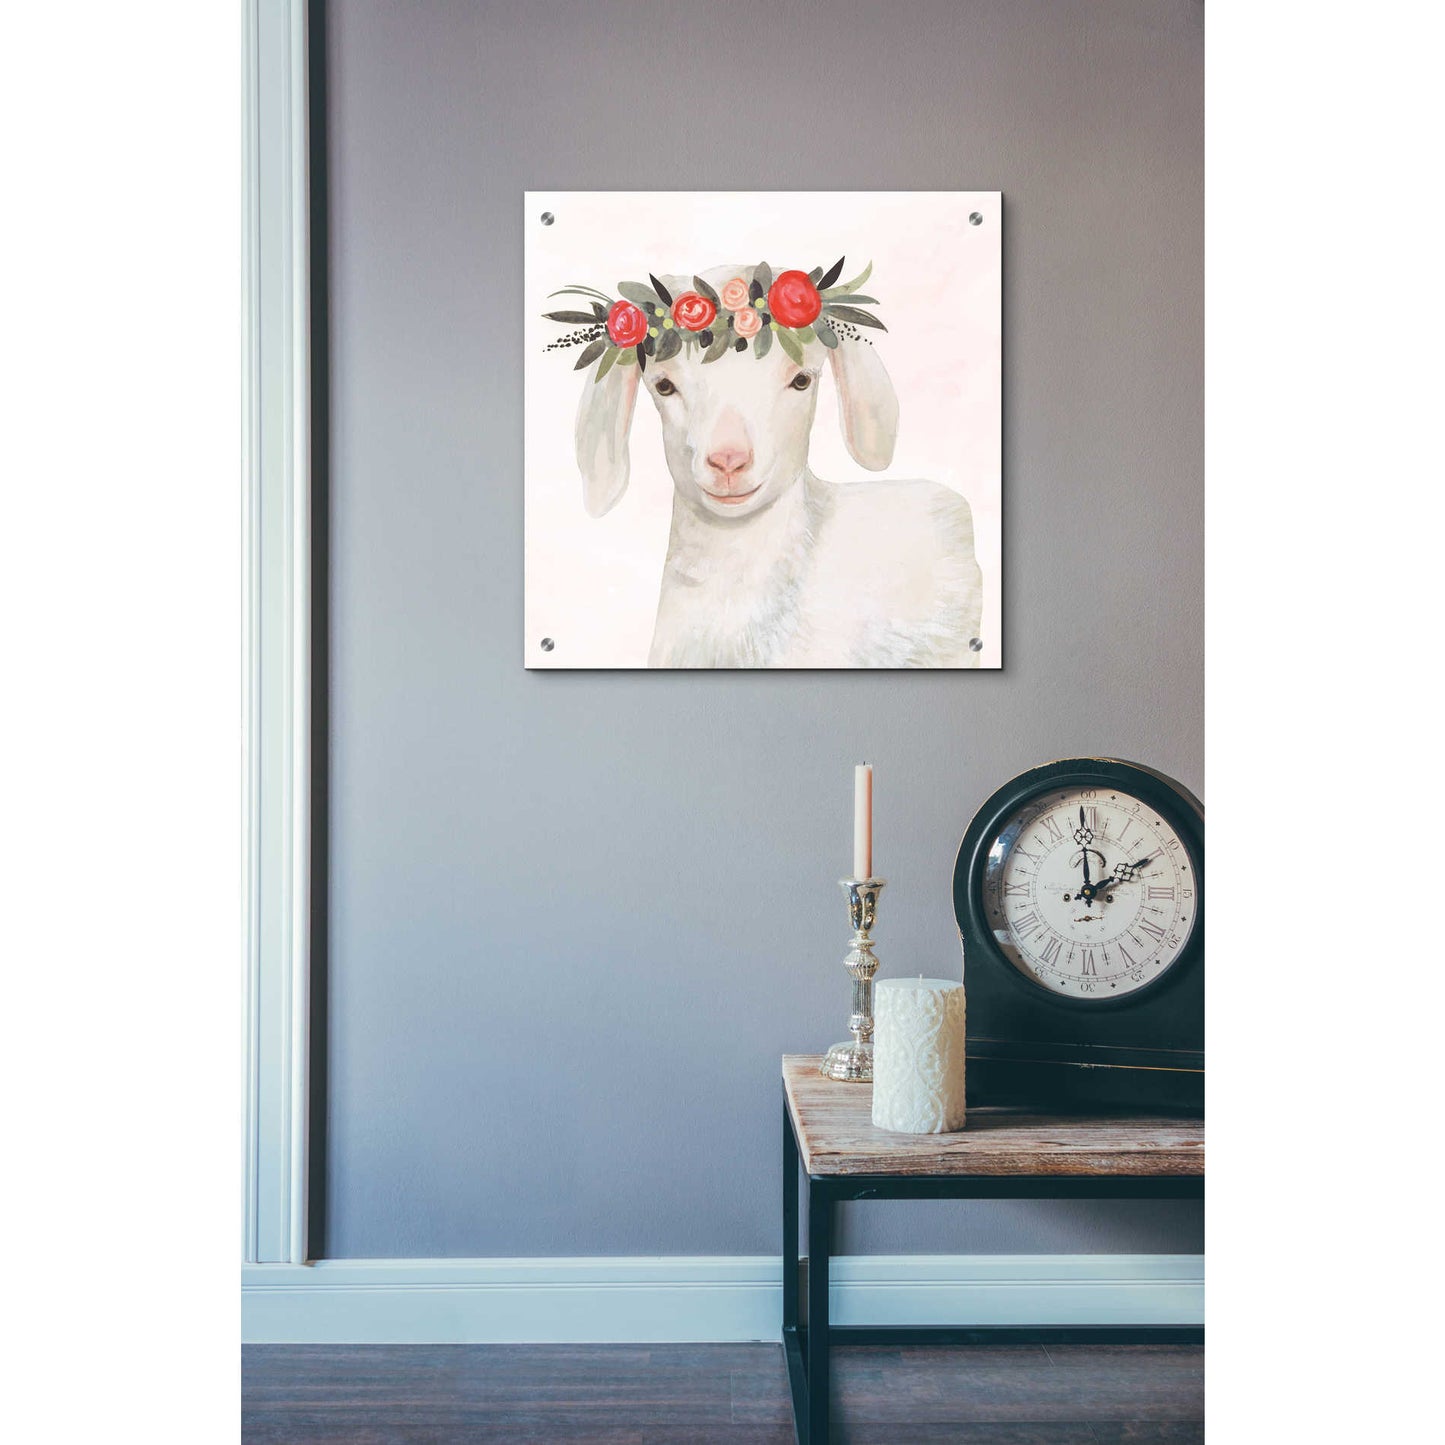 Epic Art 'Garden Goat IV' by Victoria Borges, Acrylic Glass Wall Art,24x24